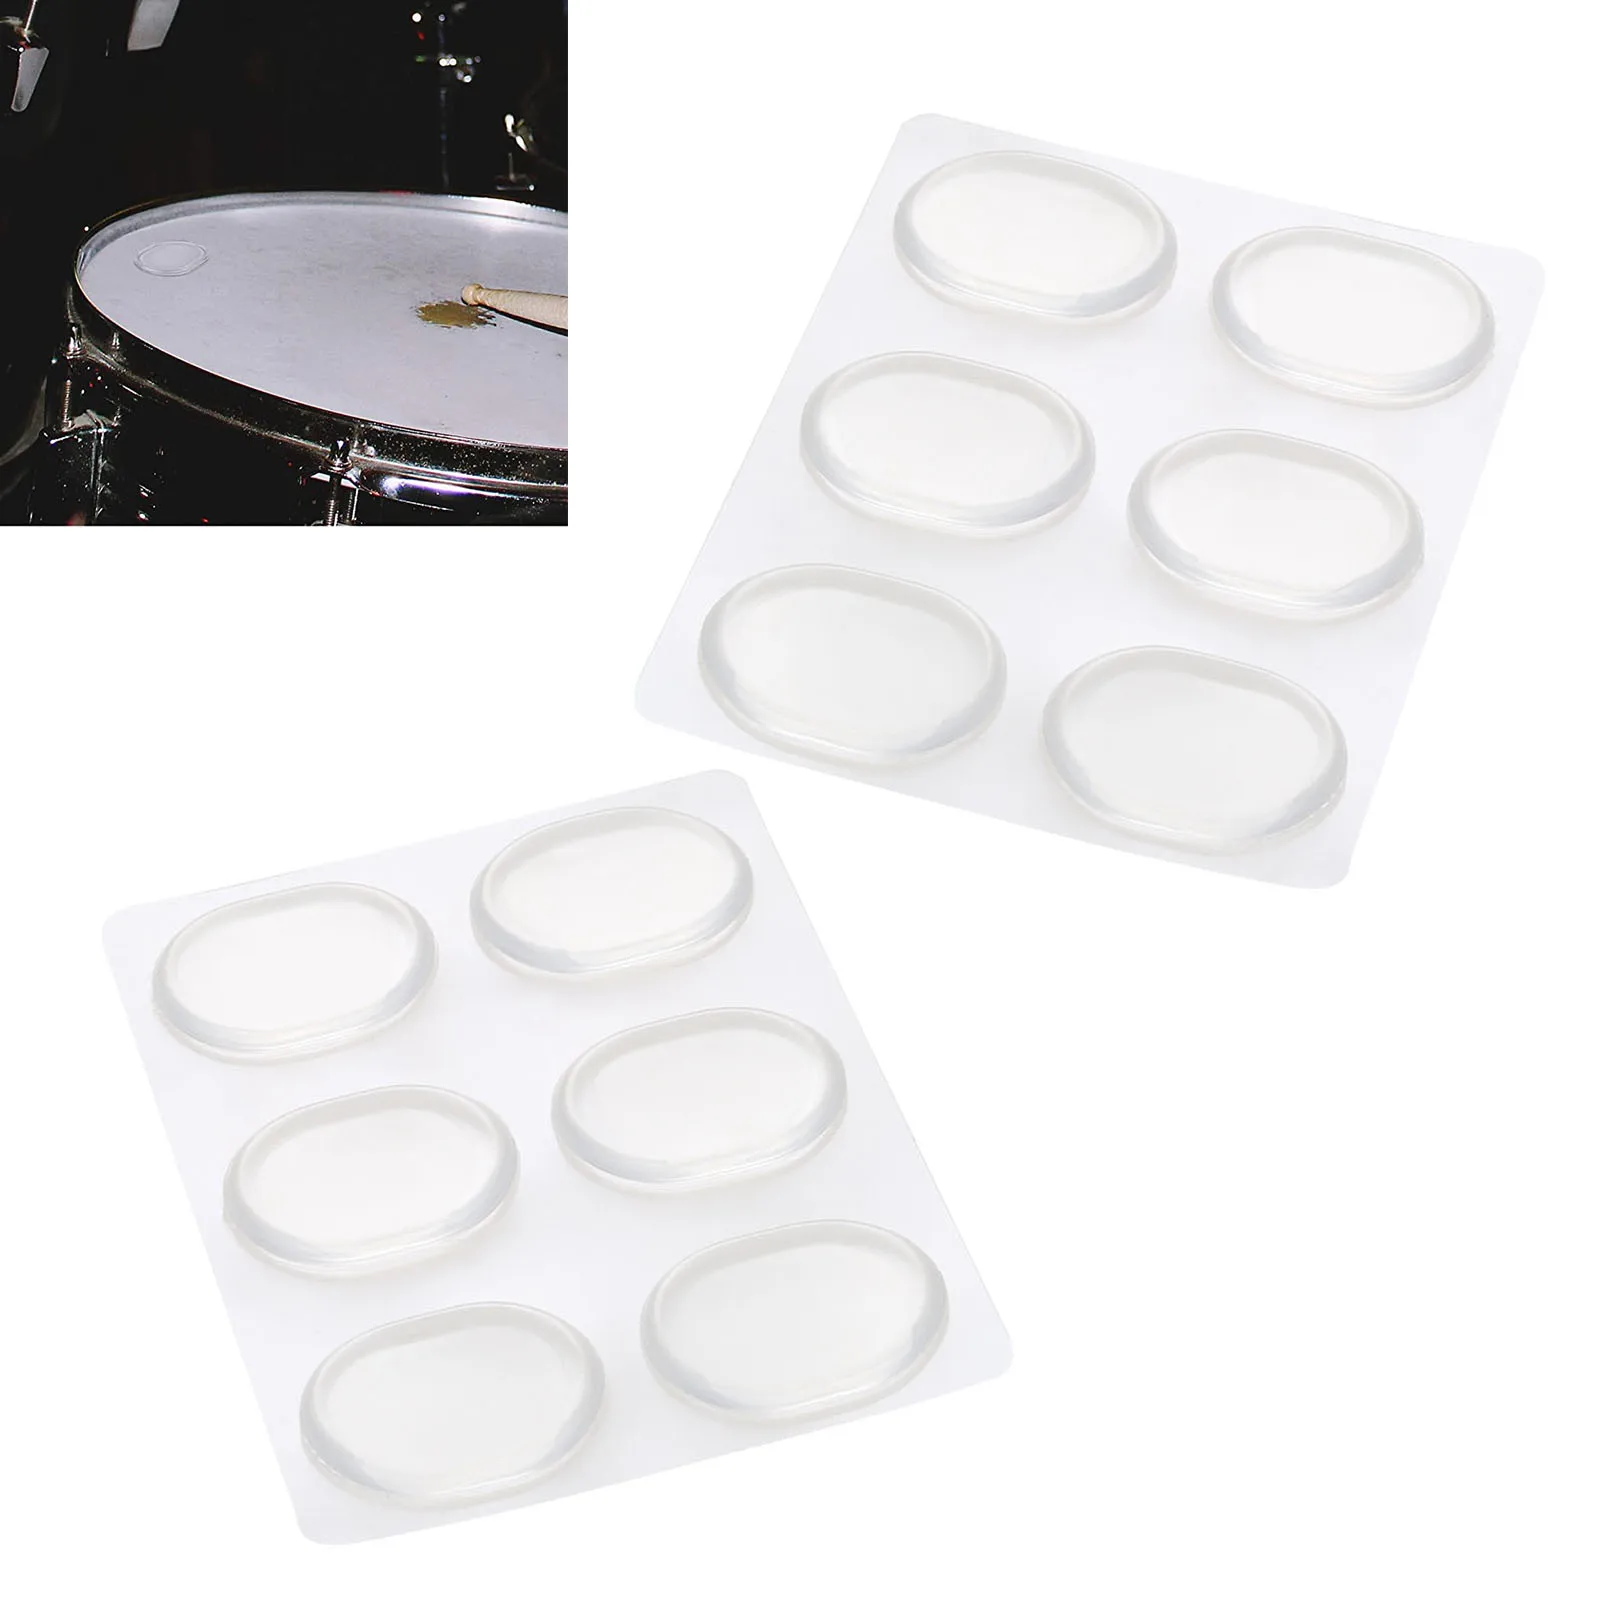 12 Pcs Round Silicone Drum Silencers and 2 Pcs Long Clear Soft Drum Dampening Gel Pads Transparent Drum Mute Pads for Drums Tone Control MIKIMIQI Drum Dampeners Gel Pads 